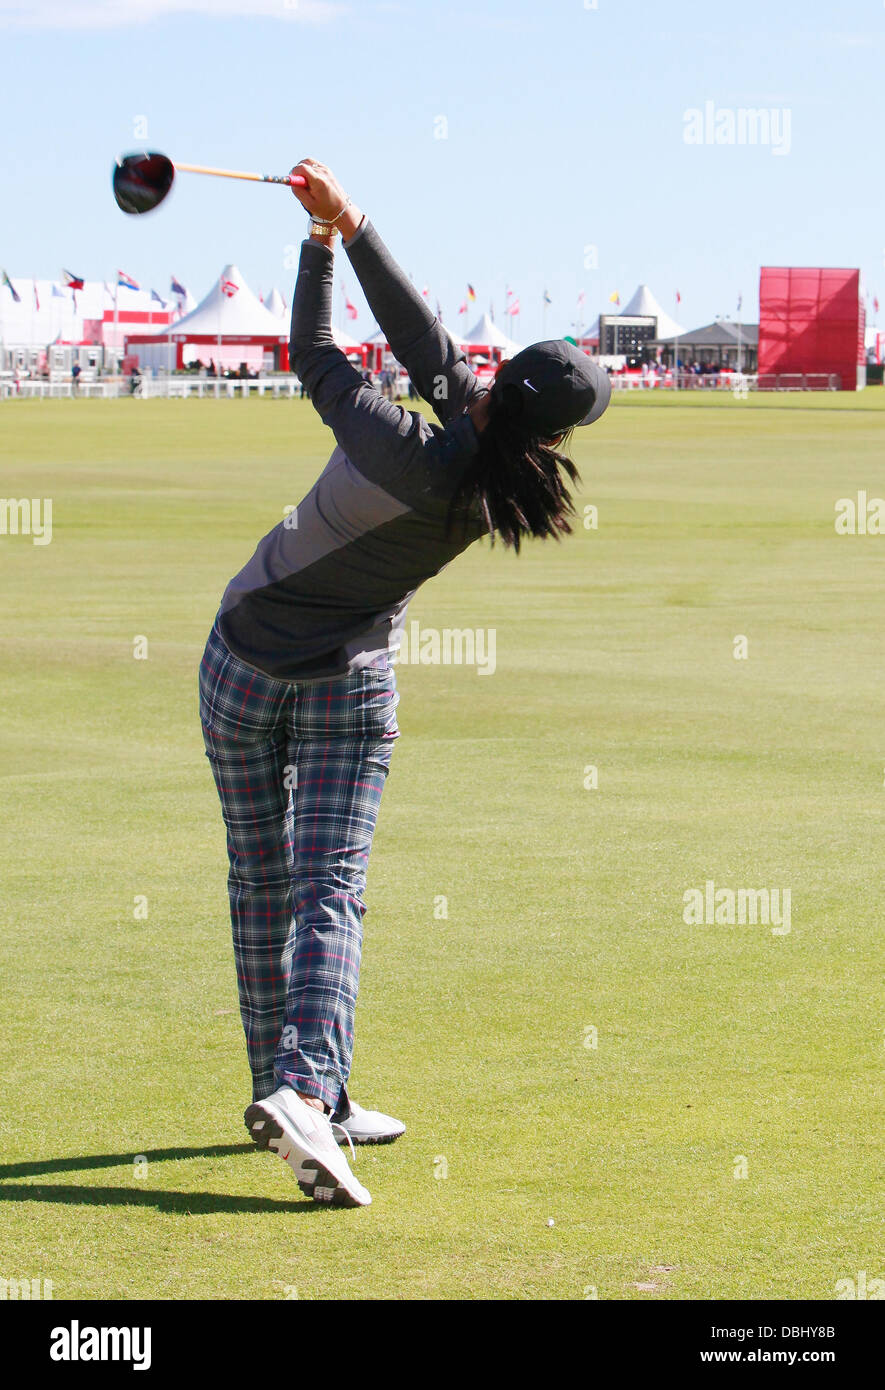 St Andrews, UK. 31st July, 2013. Michelle Wie plays at The Ricoh Women’s British Open, The Old Course, St Andrews Scotland Fife. Credit:  Derek Allan/Alamy Live News Stock Photo